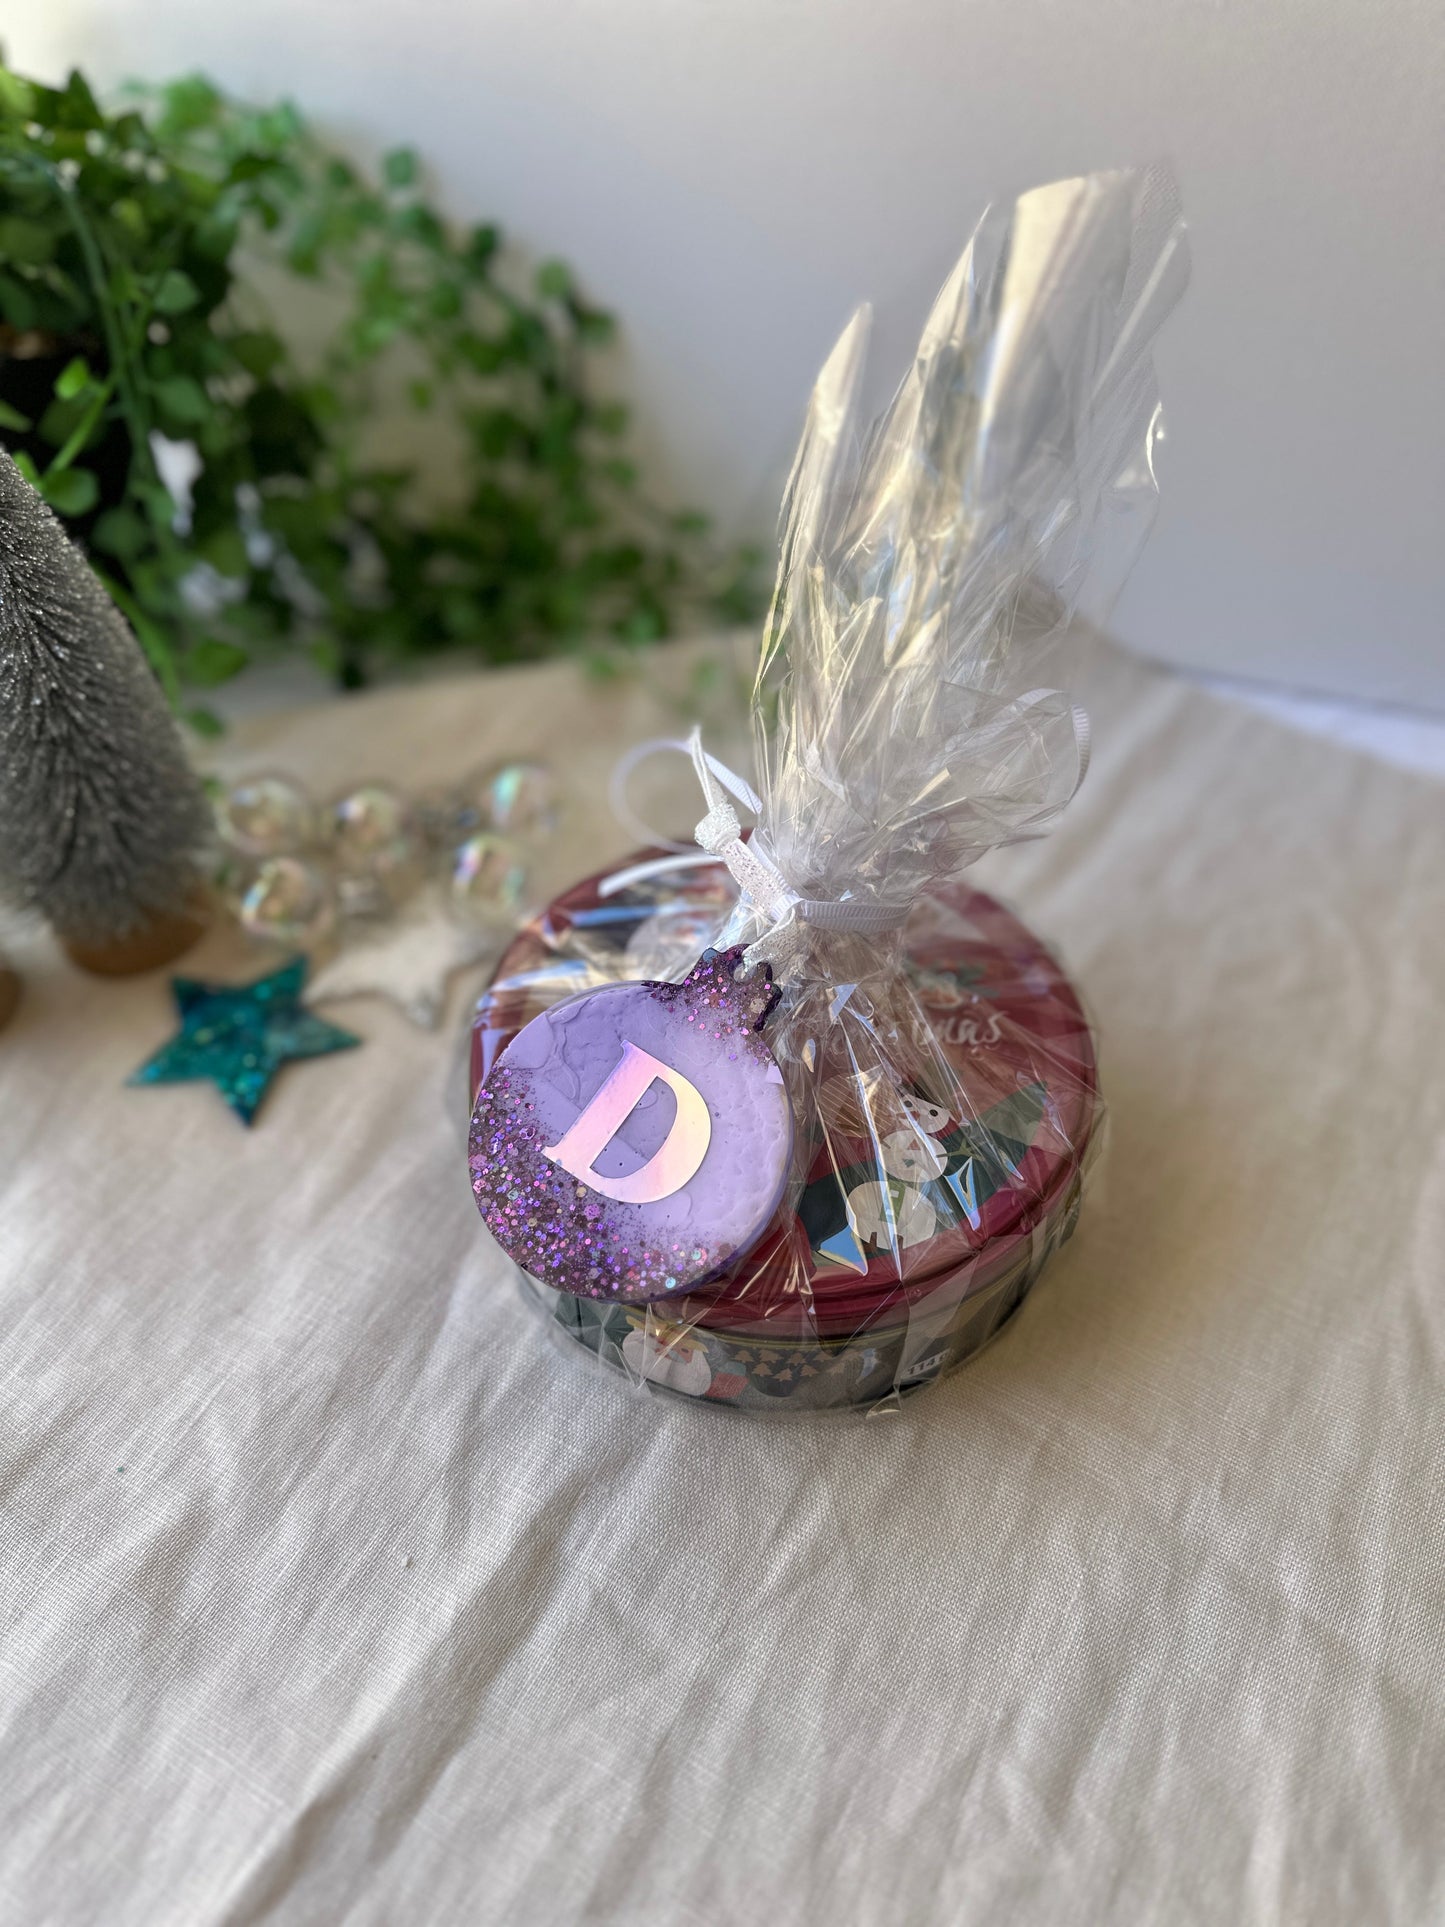 CHRISTMAS BAUBLE DECORATION - silver